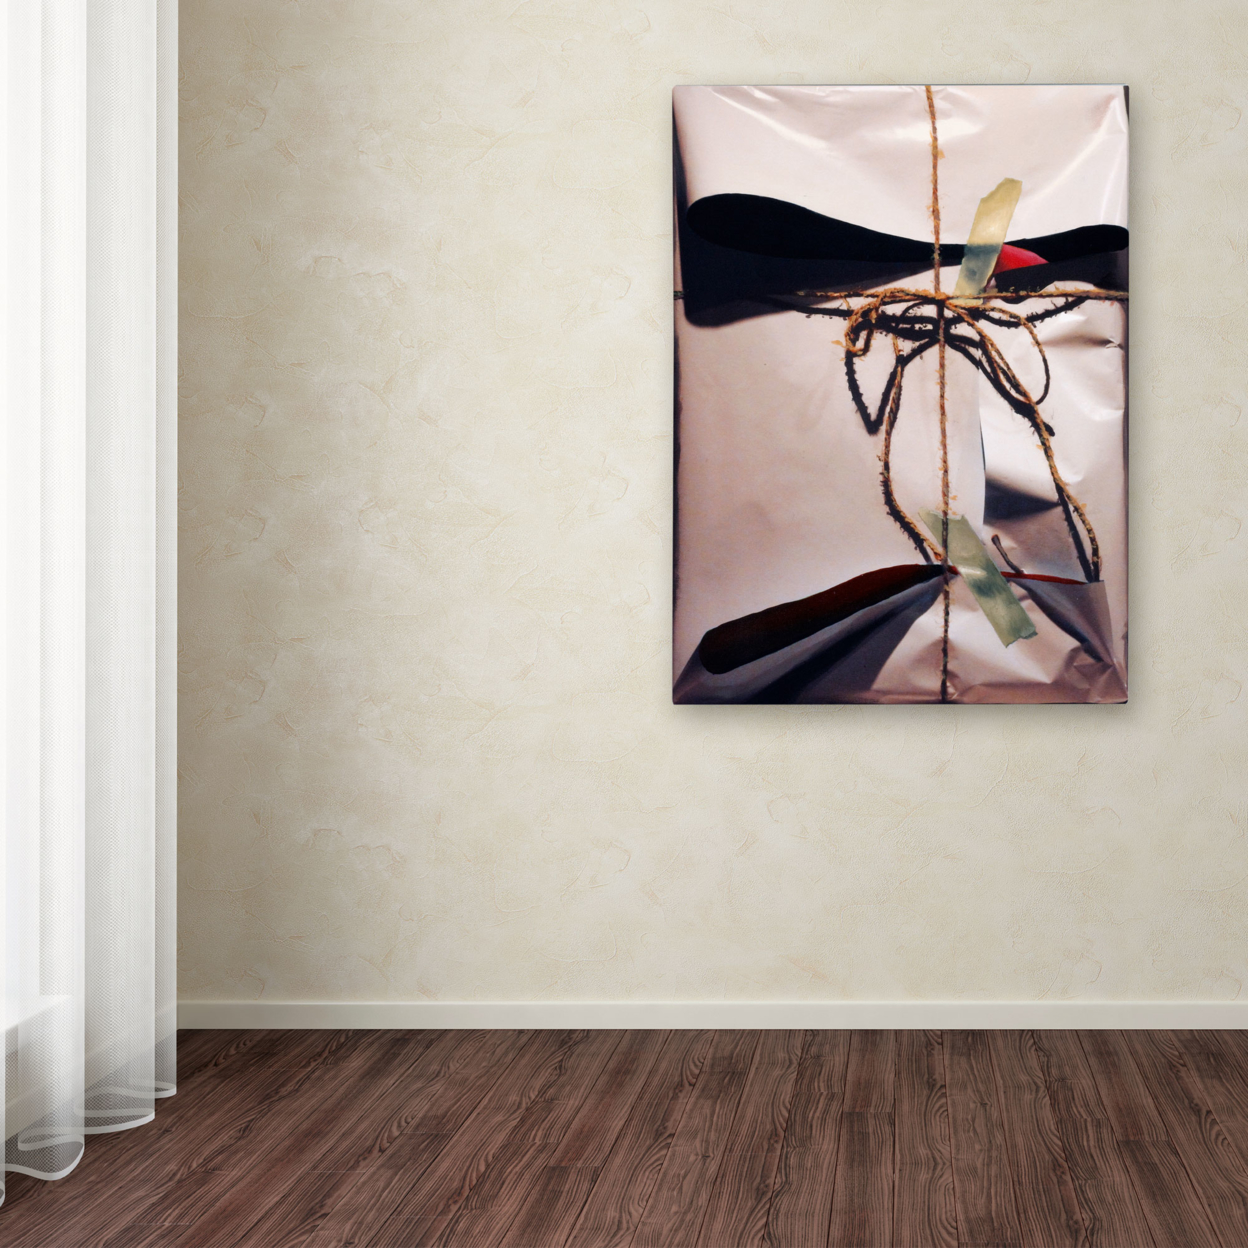 Roderick Stevens 'White Wrap With Twine' Canvas Wall Art 35 X 47 Inches